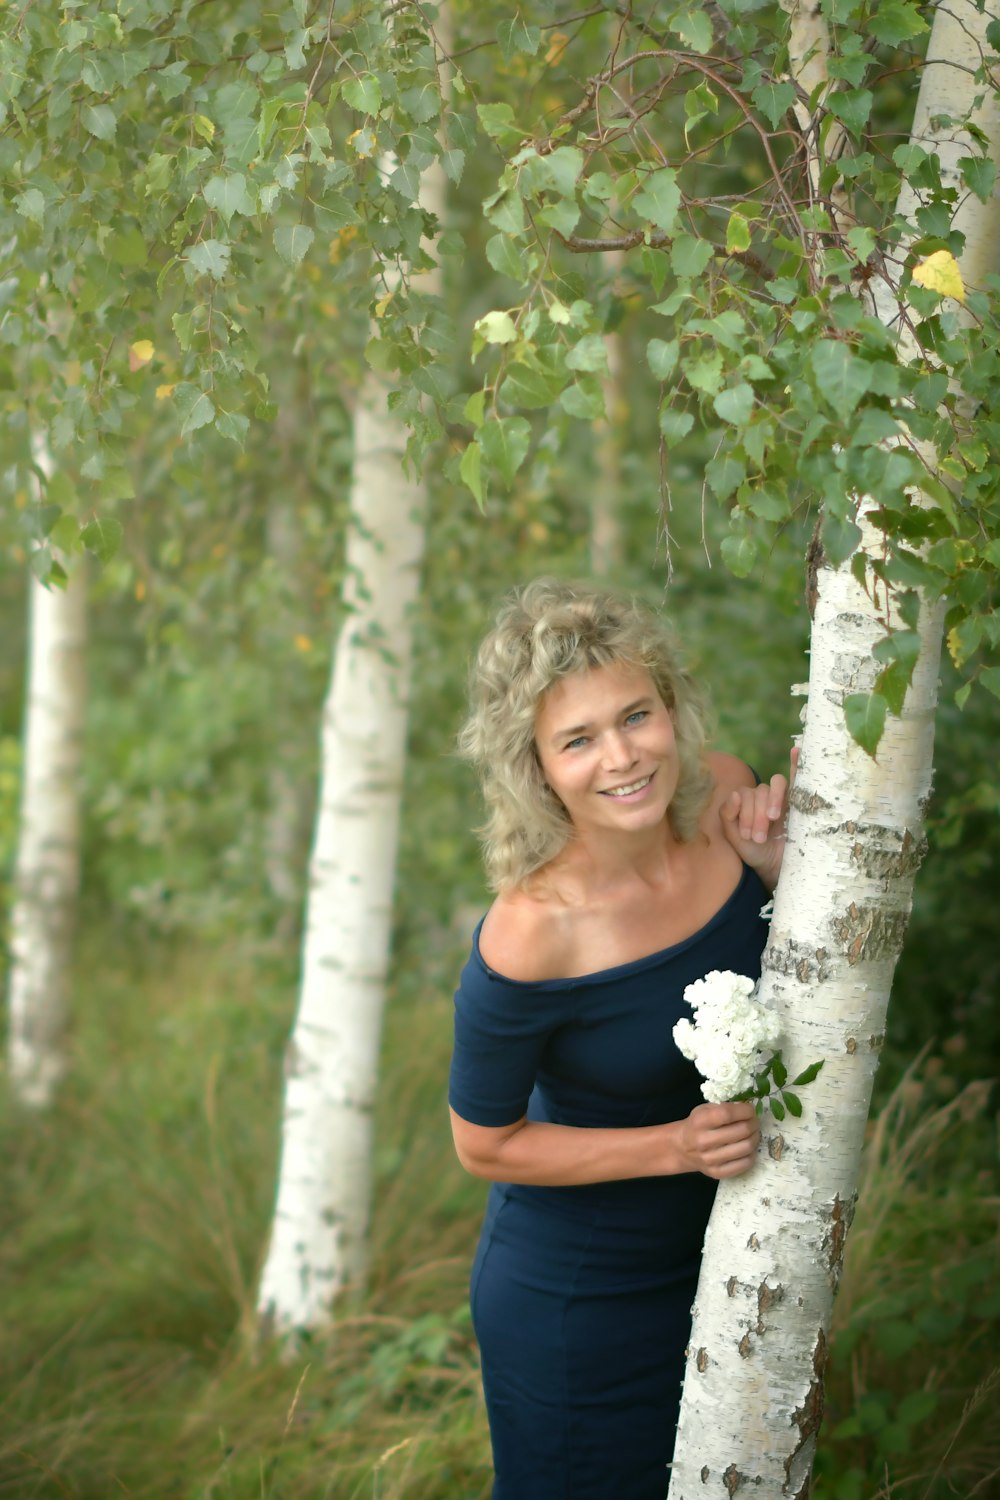 a woman standing next to a tree holding a bouquet of flowers